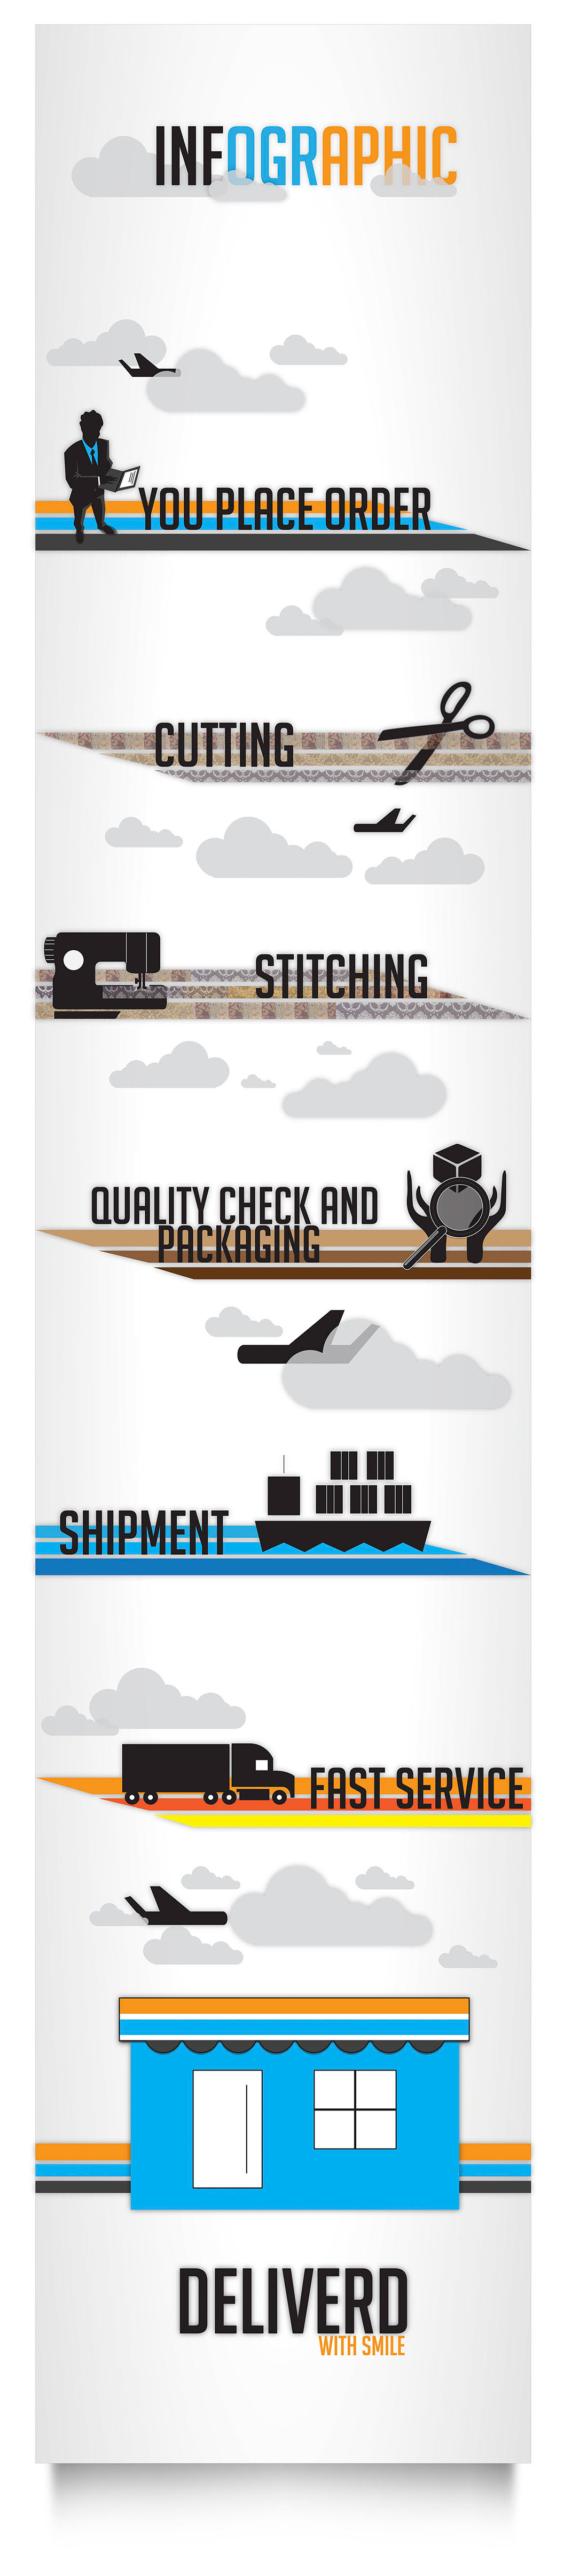 infographics onlineshopping Online Shipping